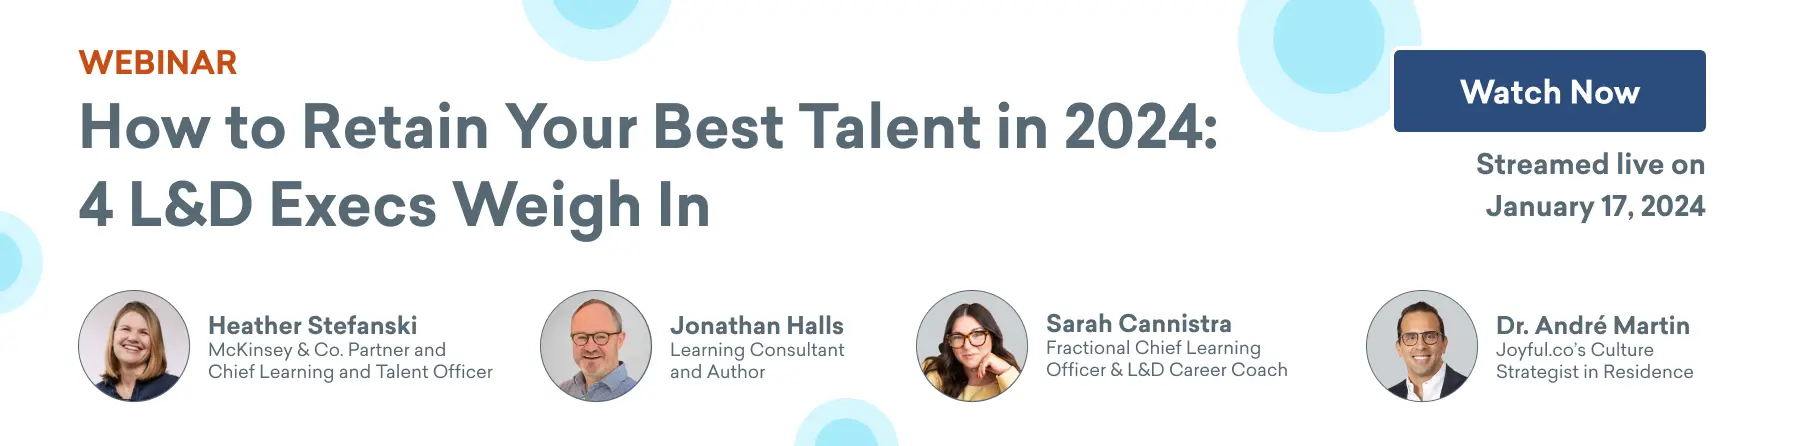 How to Retain Your Best Talent in 2024: 4 L&D Execs Weigh In